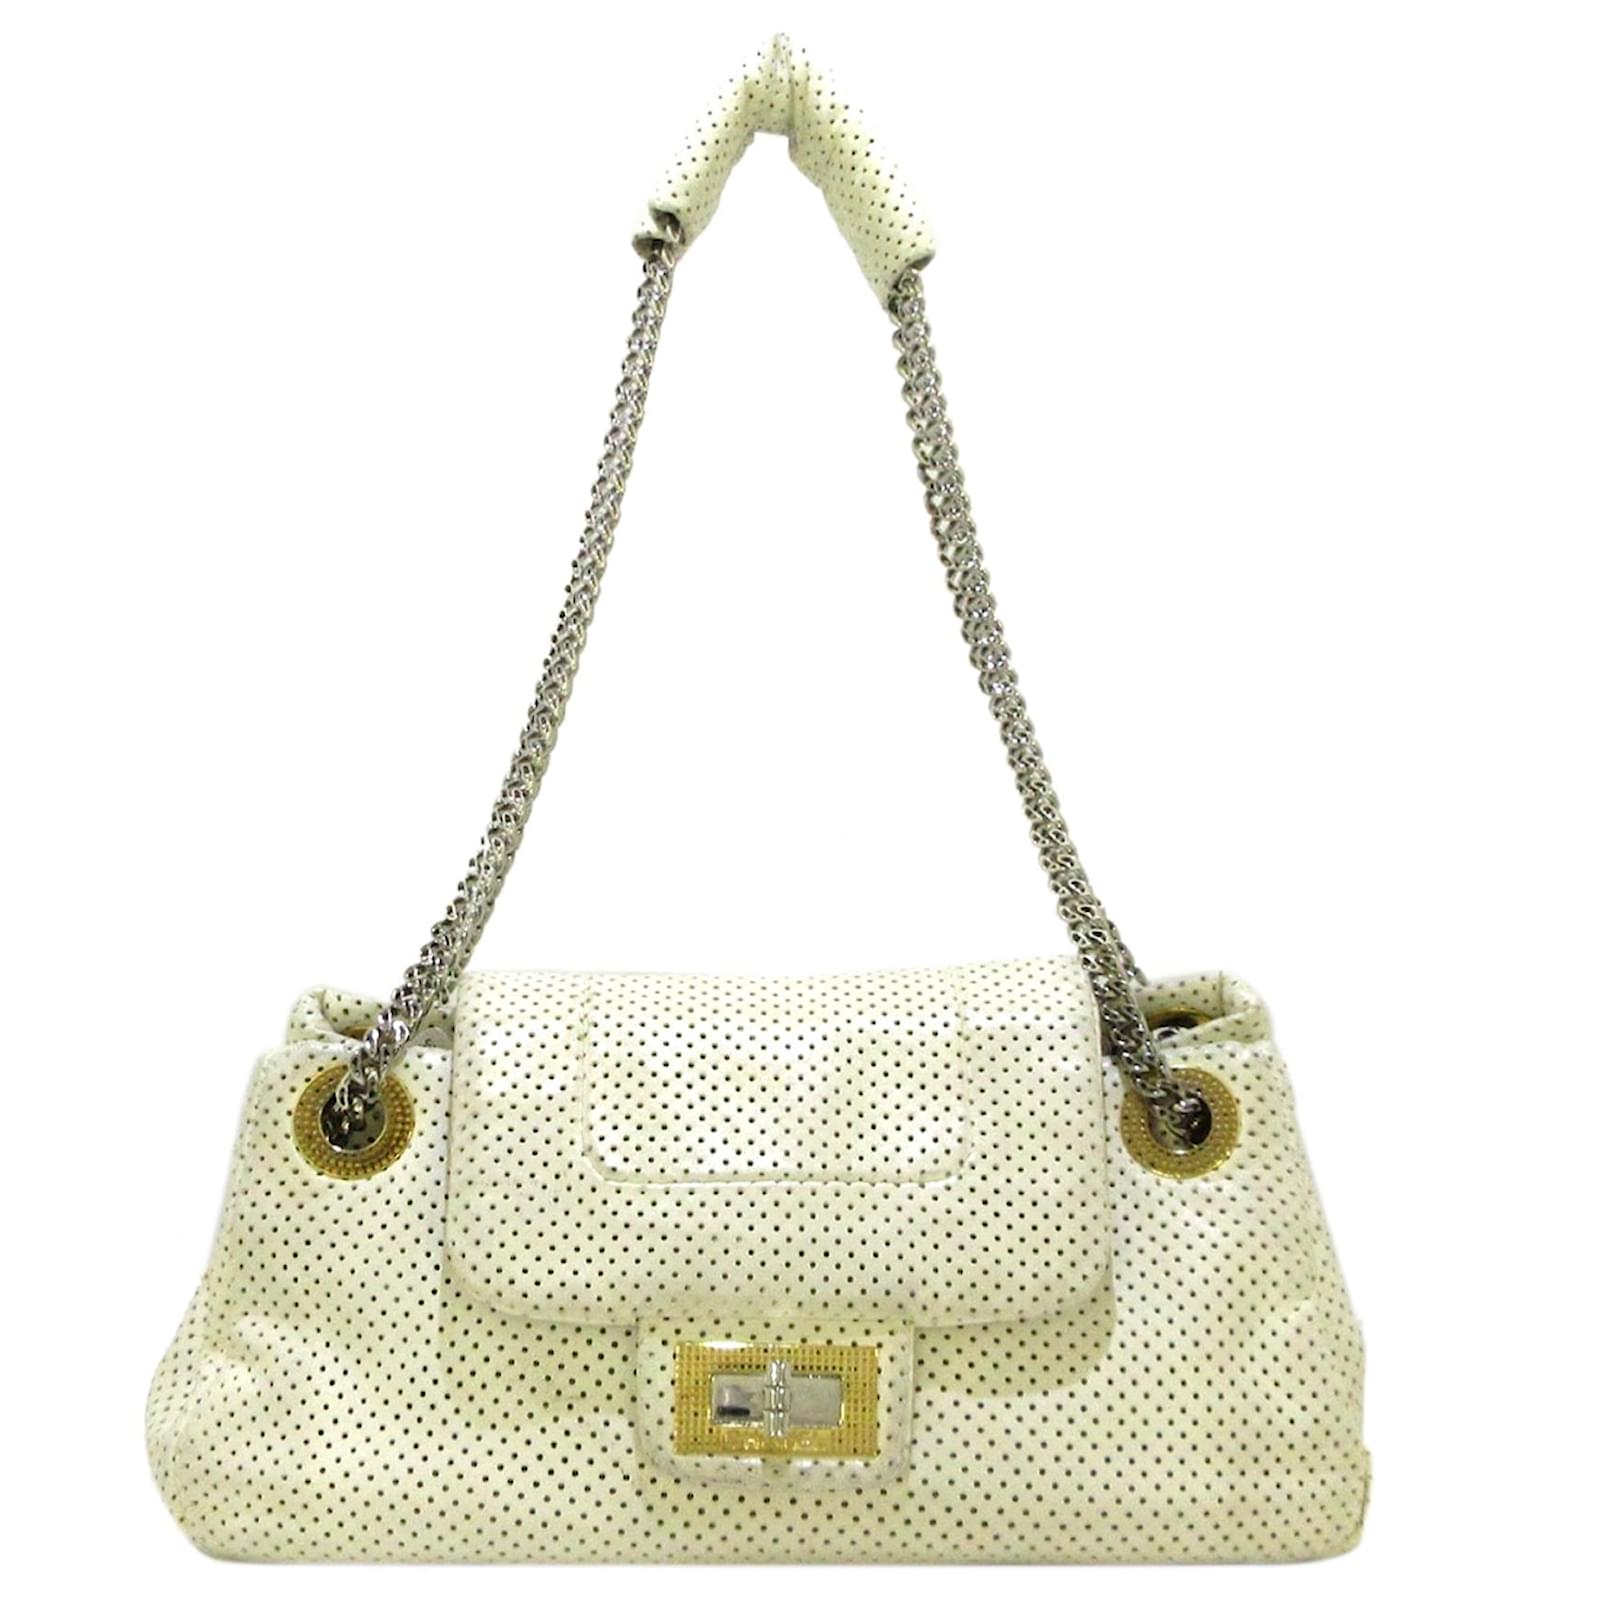 Chanel White Perforated Drill Accordion Flap Bag Leather Metal